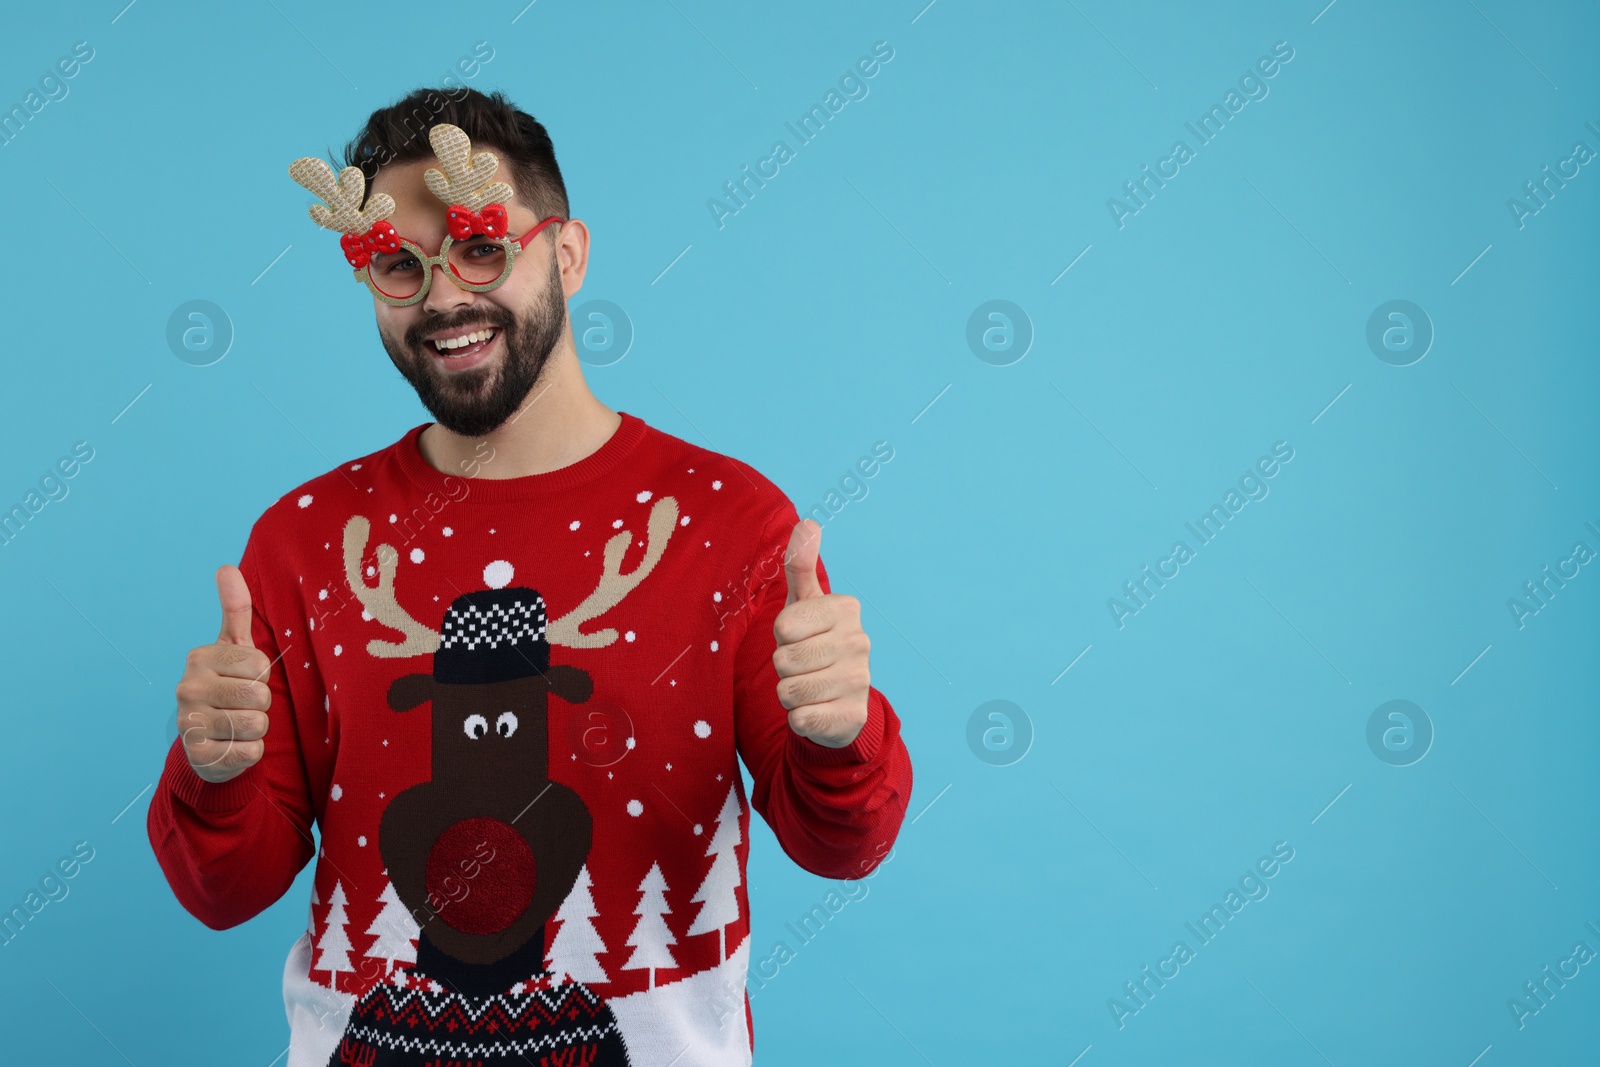 Photo of Happy young man in Christmas sweater and funny glasses showing thumbs up on light blue background. Space for text